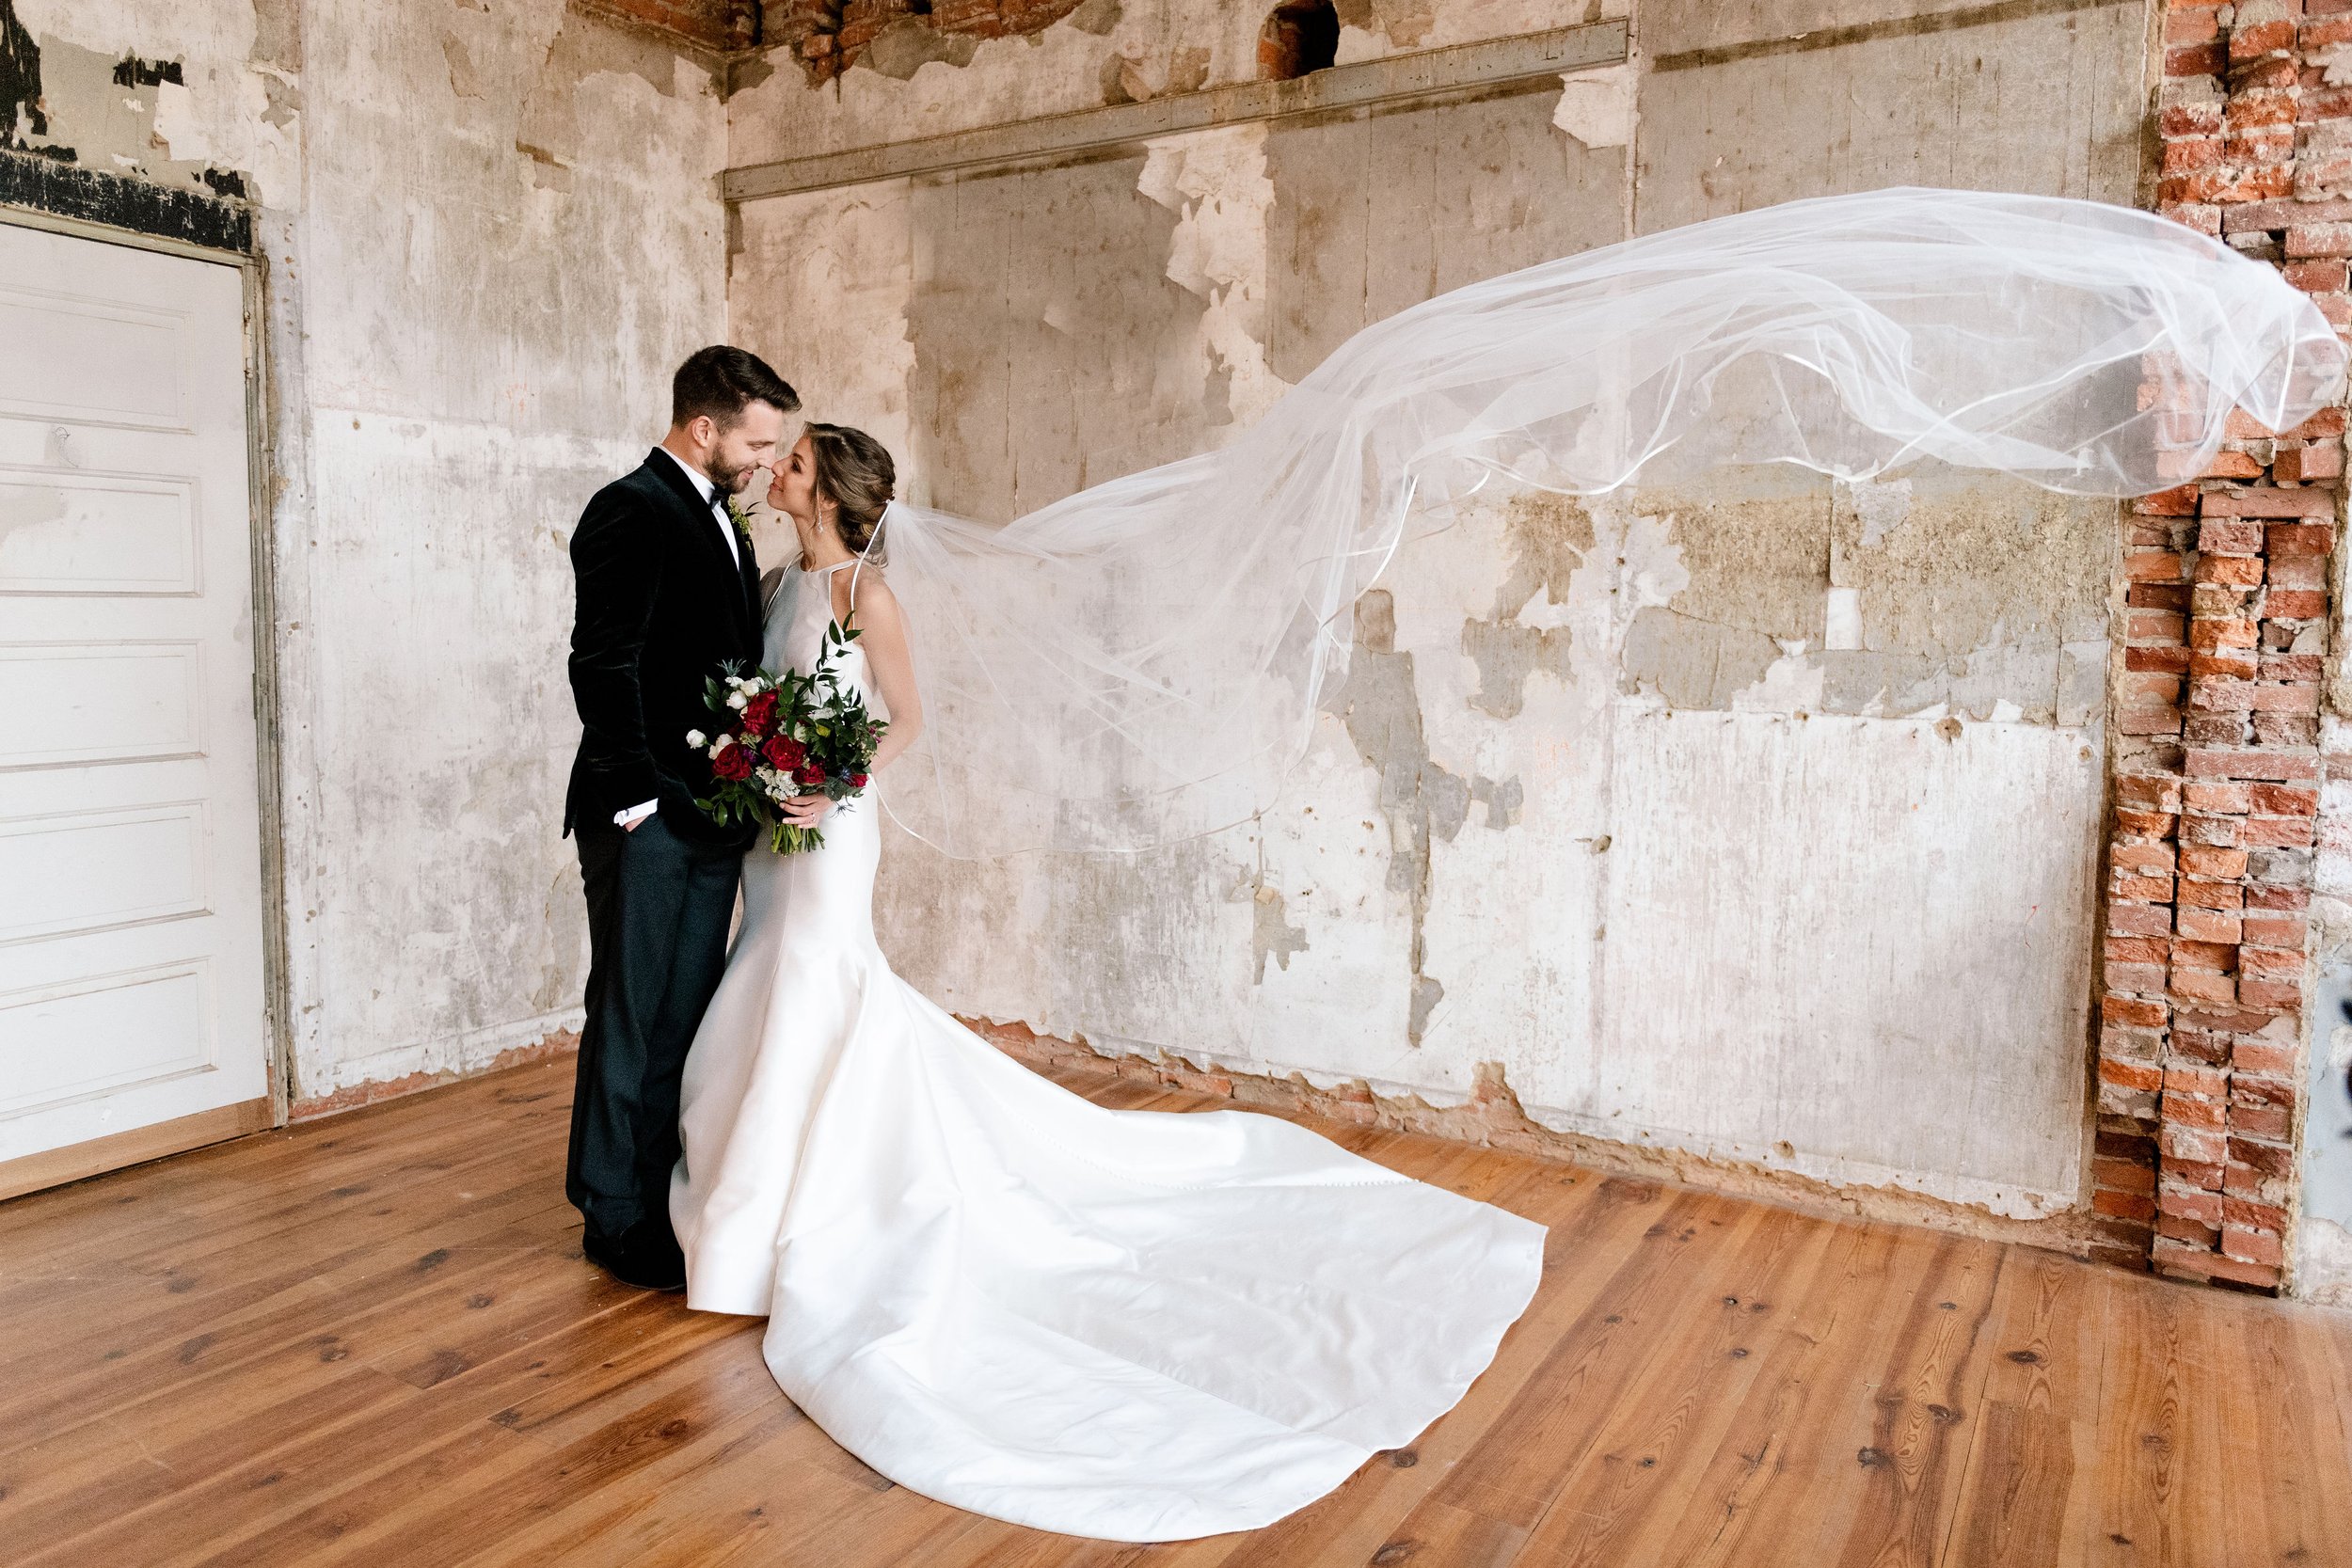 Couple embracing in the eclectic historic space at Excelsior wedding venue